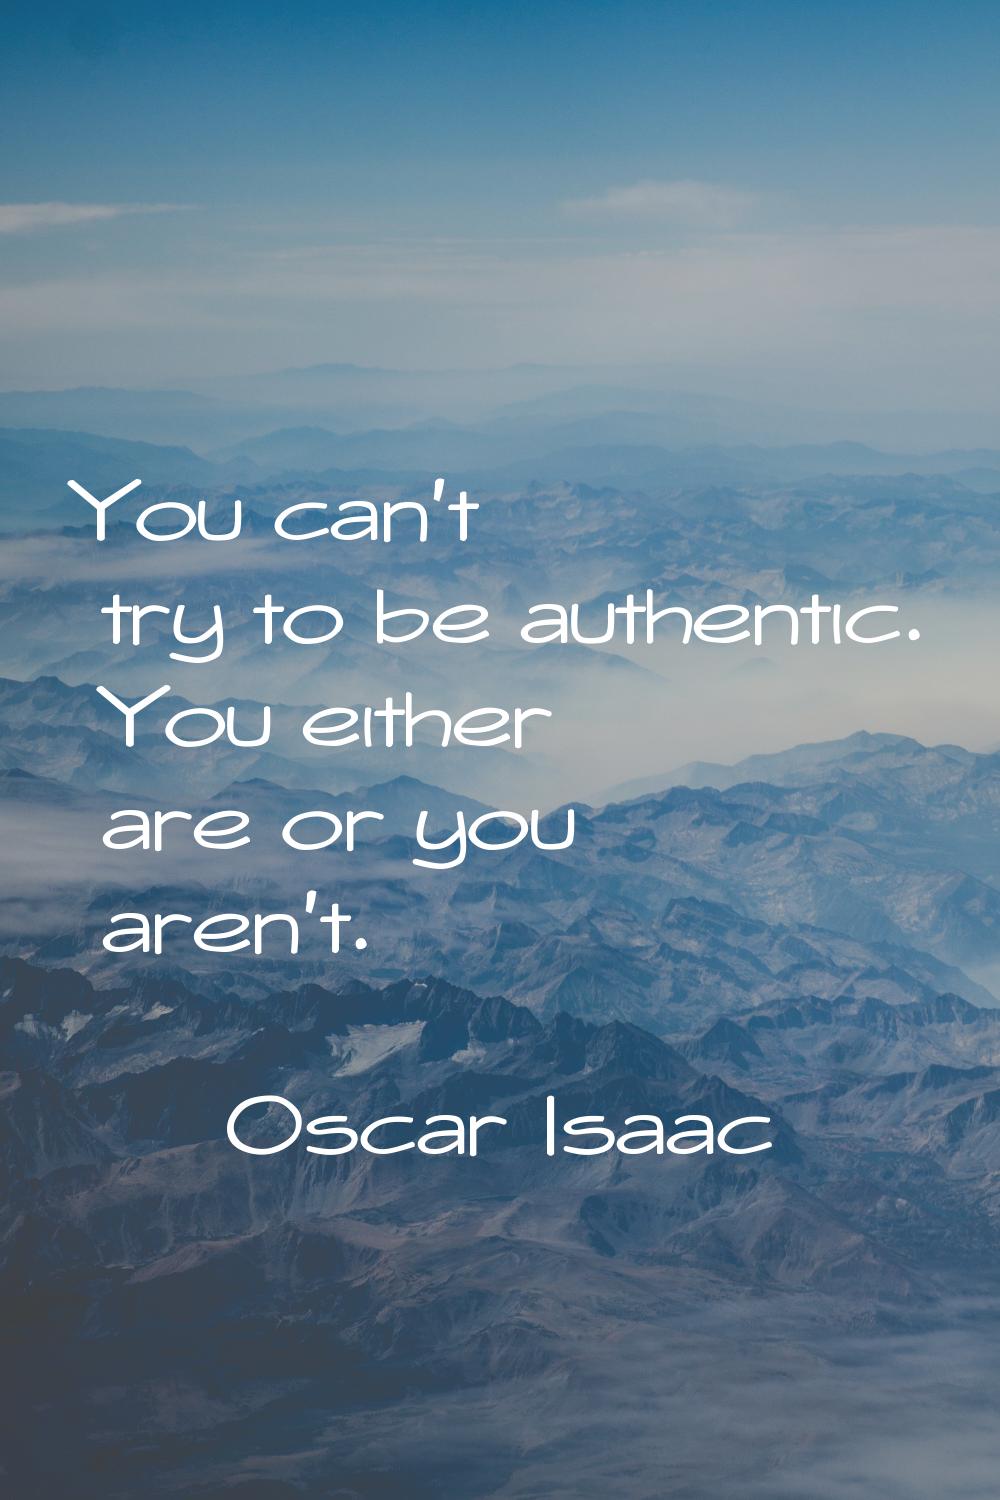 You can't try to be authentic. You either are or you aren't.